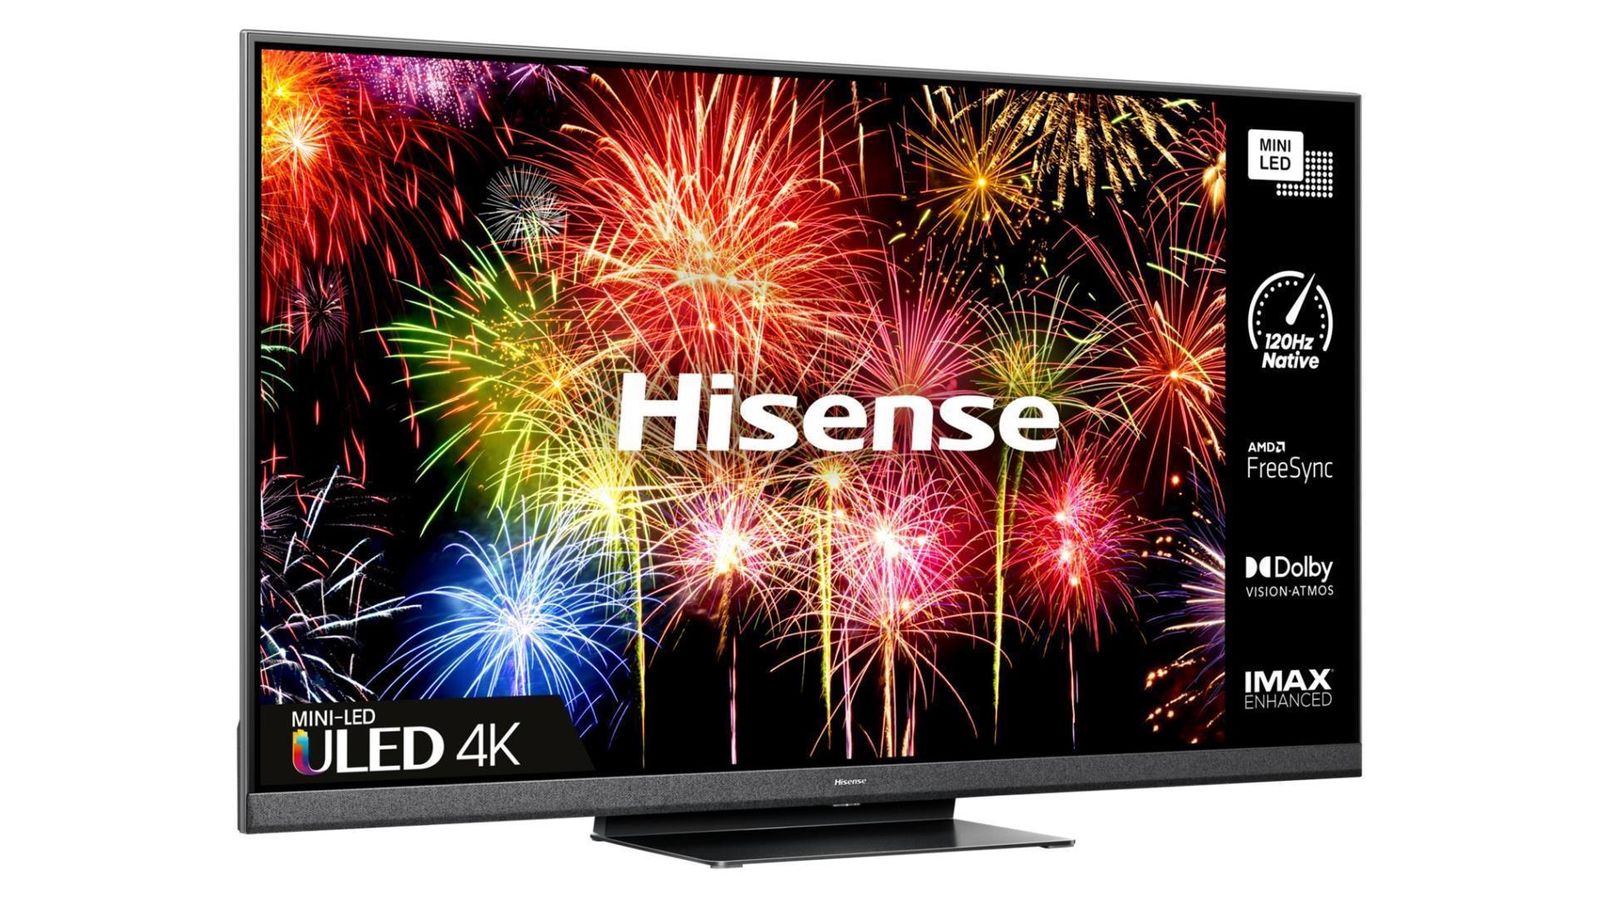 Best TV brands - Hisense U8H product image of a black TV featuring Hisense branding on the display in front of fireworks.